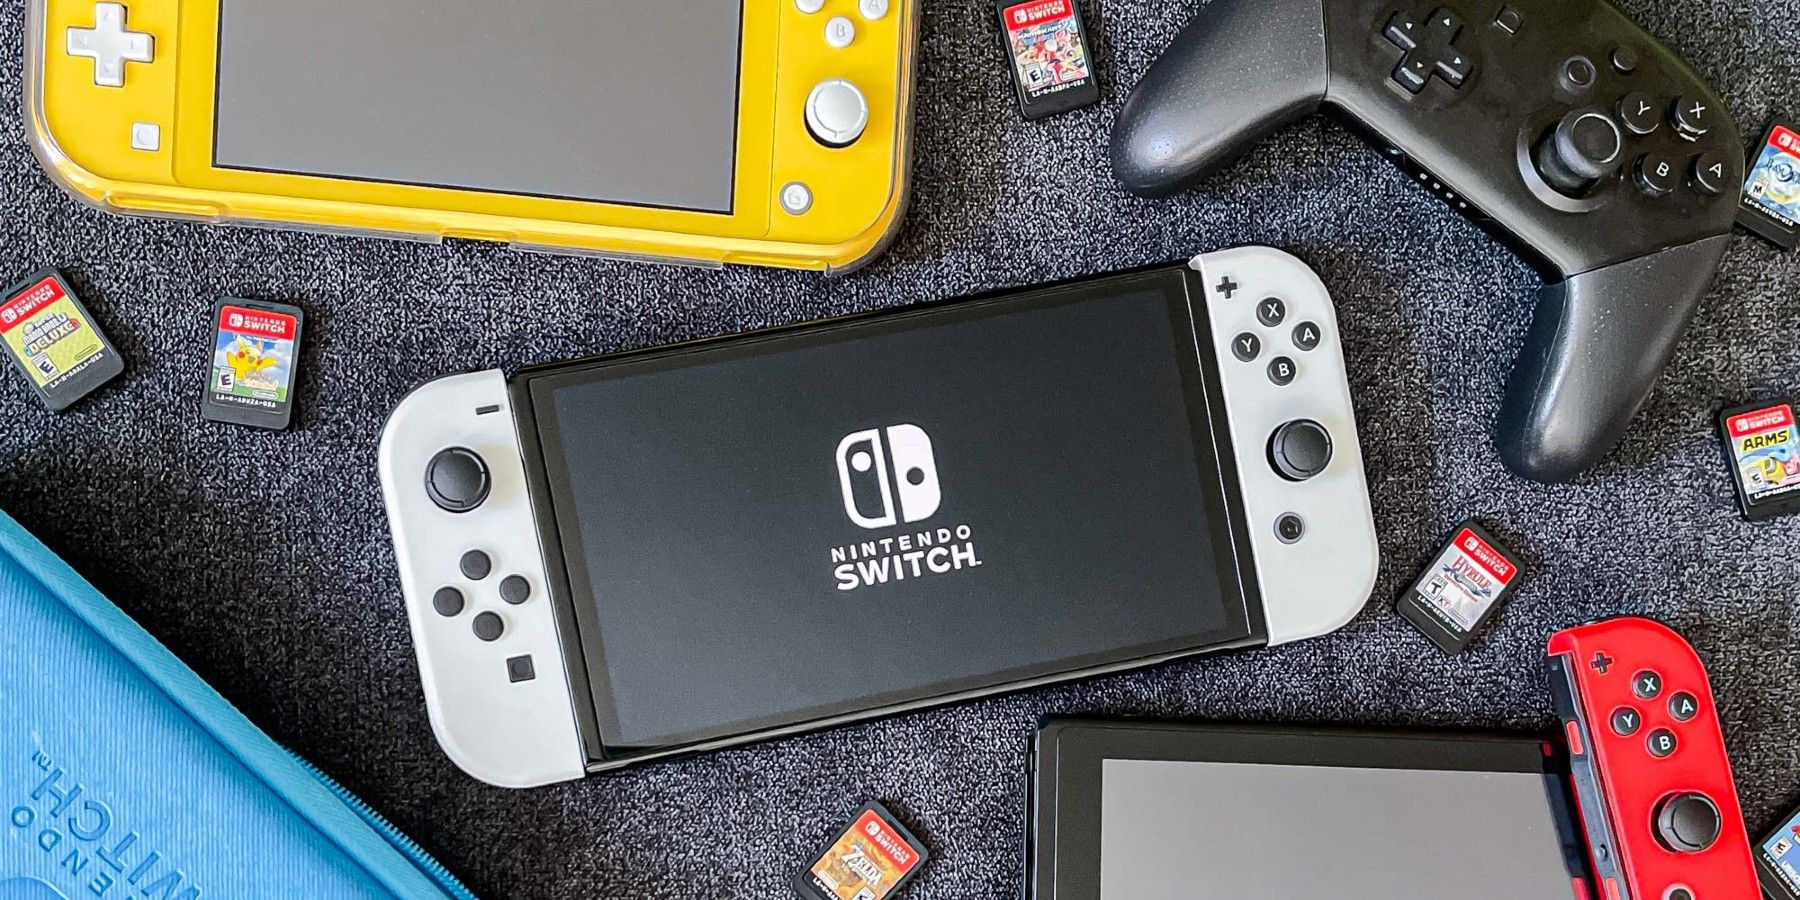 Nintendo Switch Sold More Units in Japan Last Year Than All Other Consoles Combined